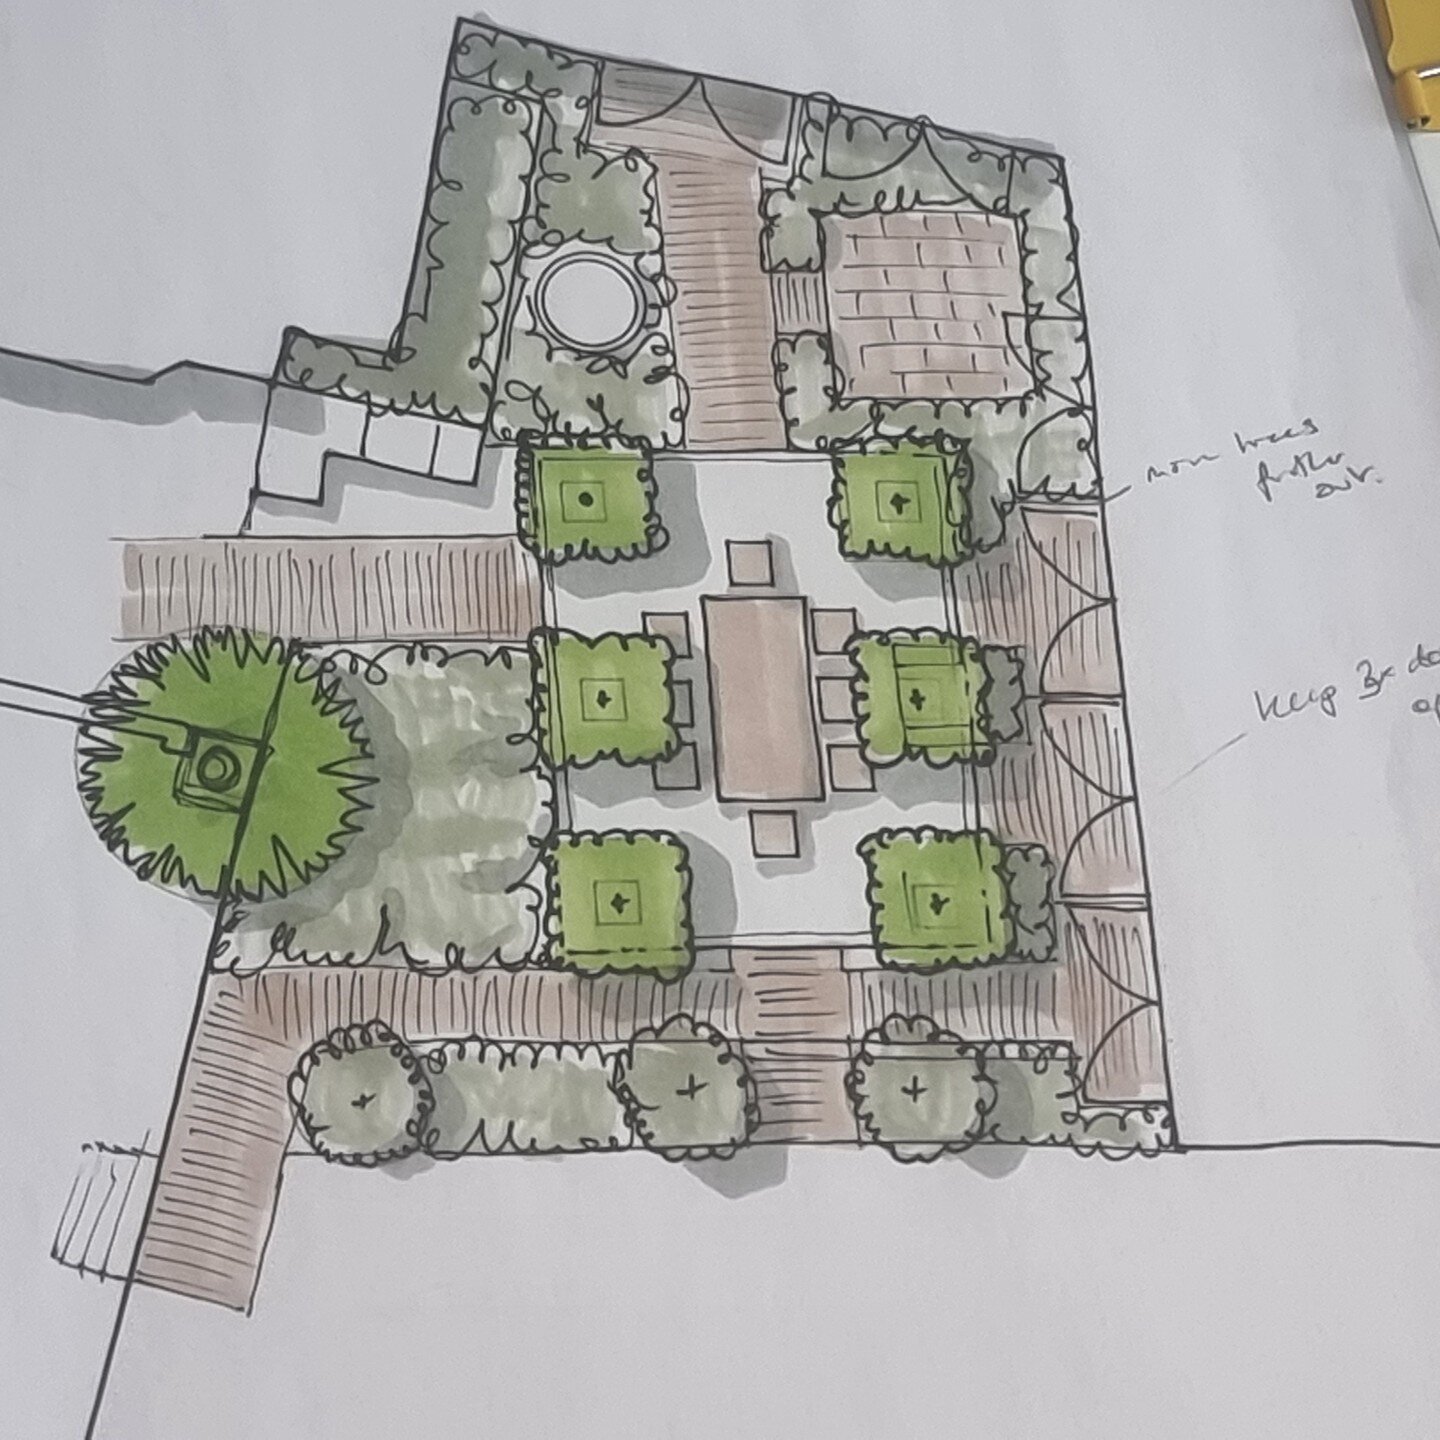 Working up some sketch layouts for a patio courtyard at a fabulous Arts &amp; Crafts house on the outskirts of Guildford.

Default go-to for inspiration for a house like this would be Gertrude Jekyll, of course - who wouldn't want to recreate that st